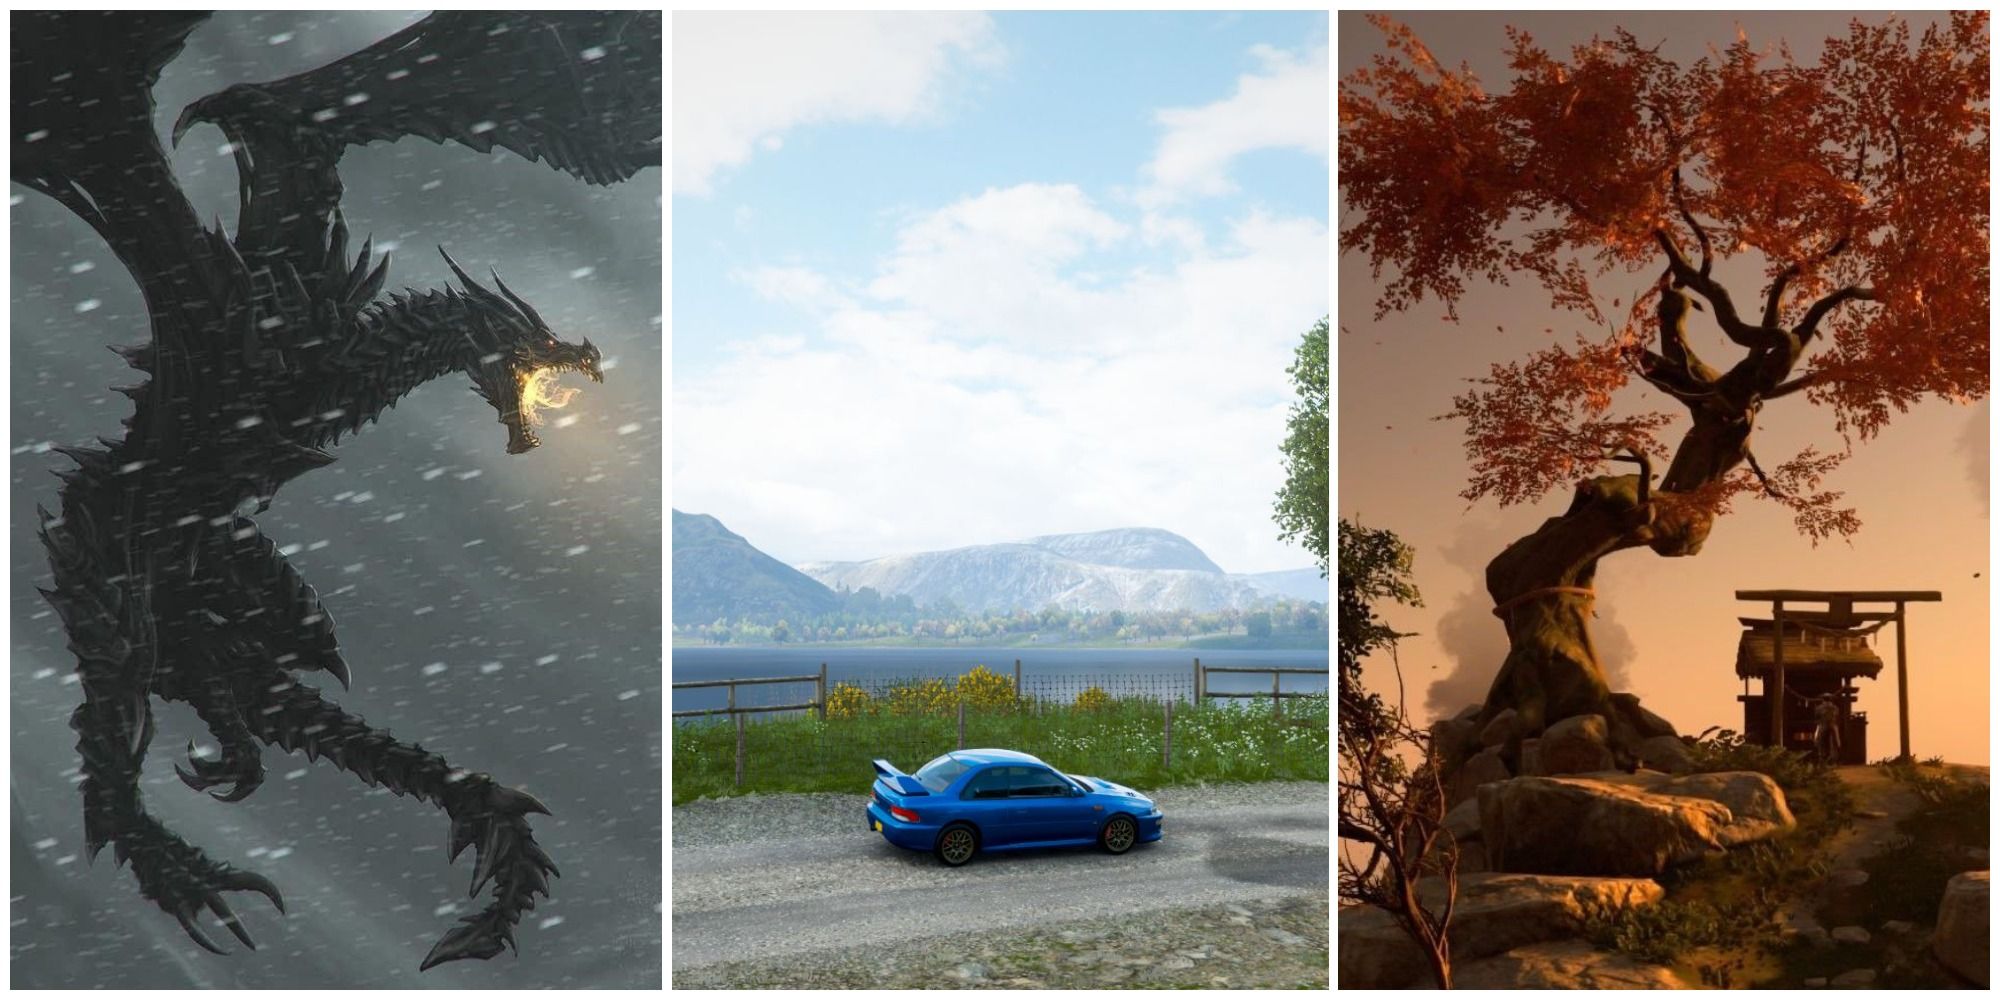 Best Weather Effects In Games